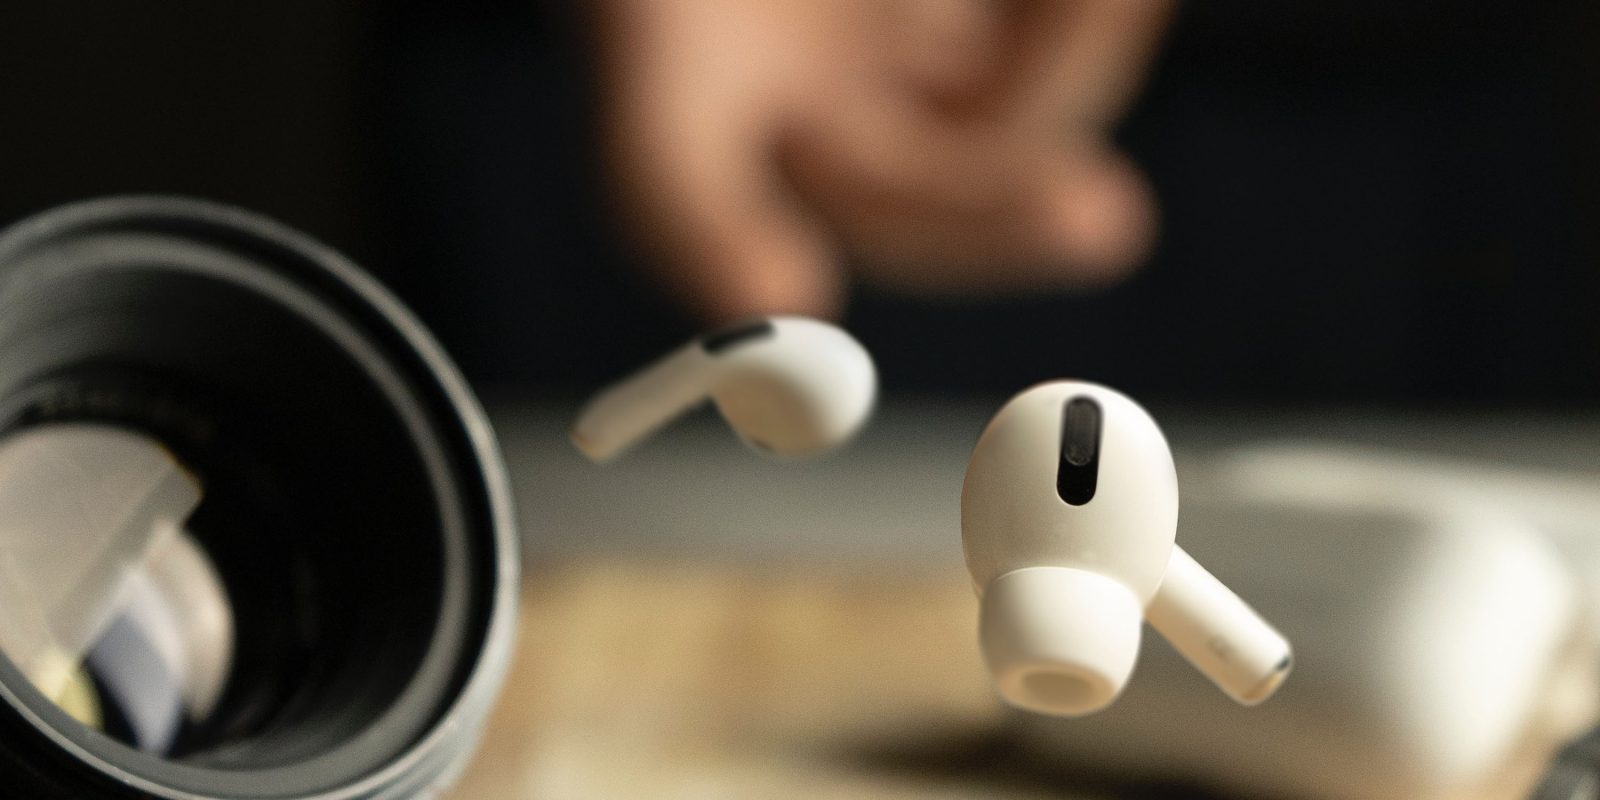 Future AirPods may verify your identity